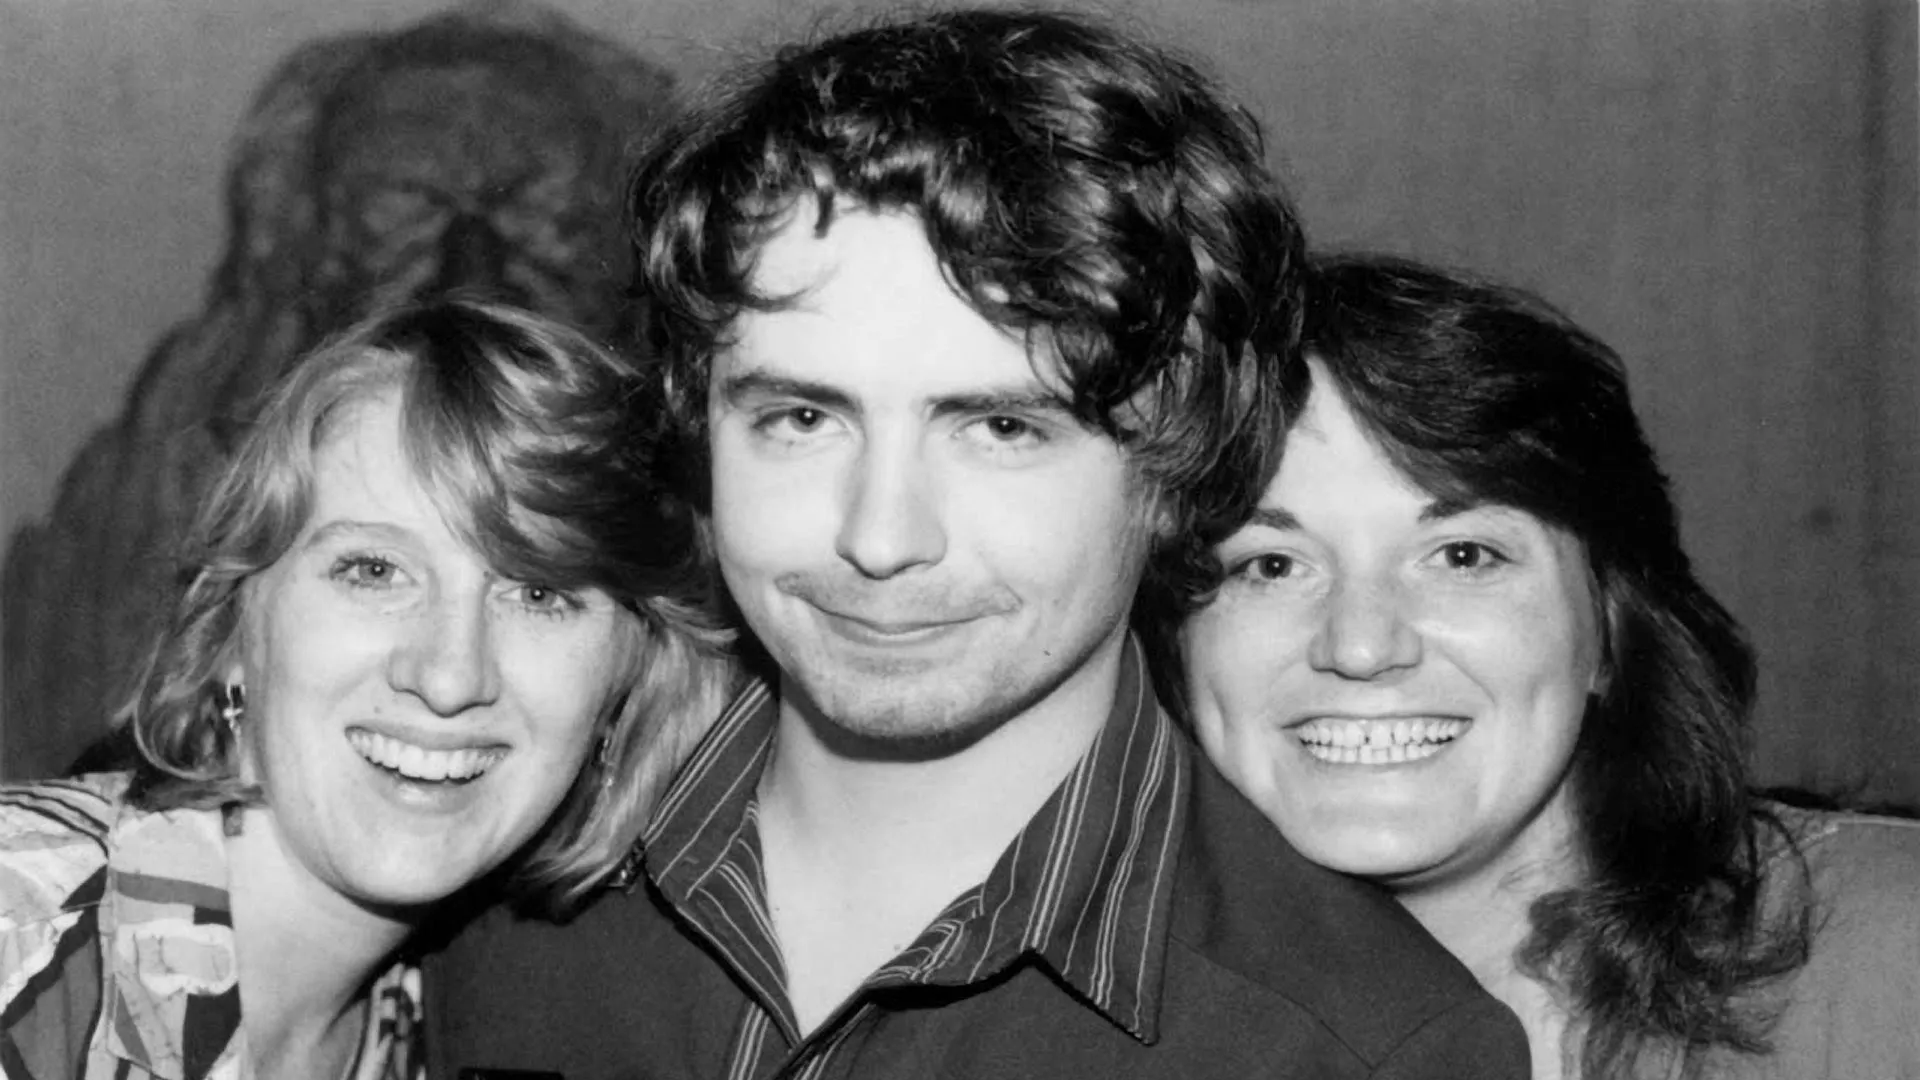 Daniel Johnston with two girls